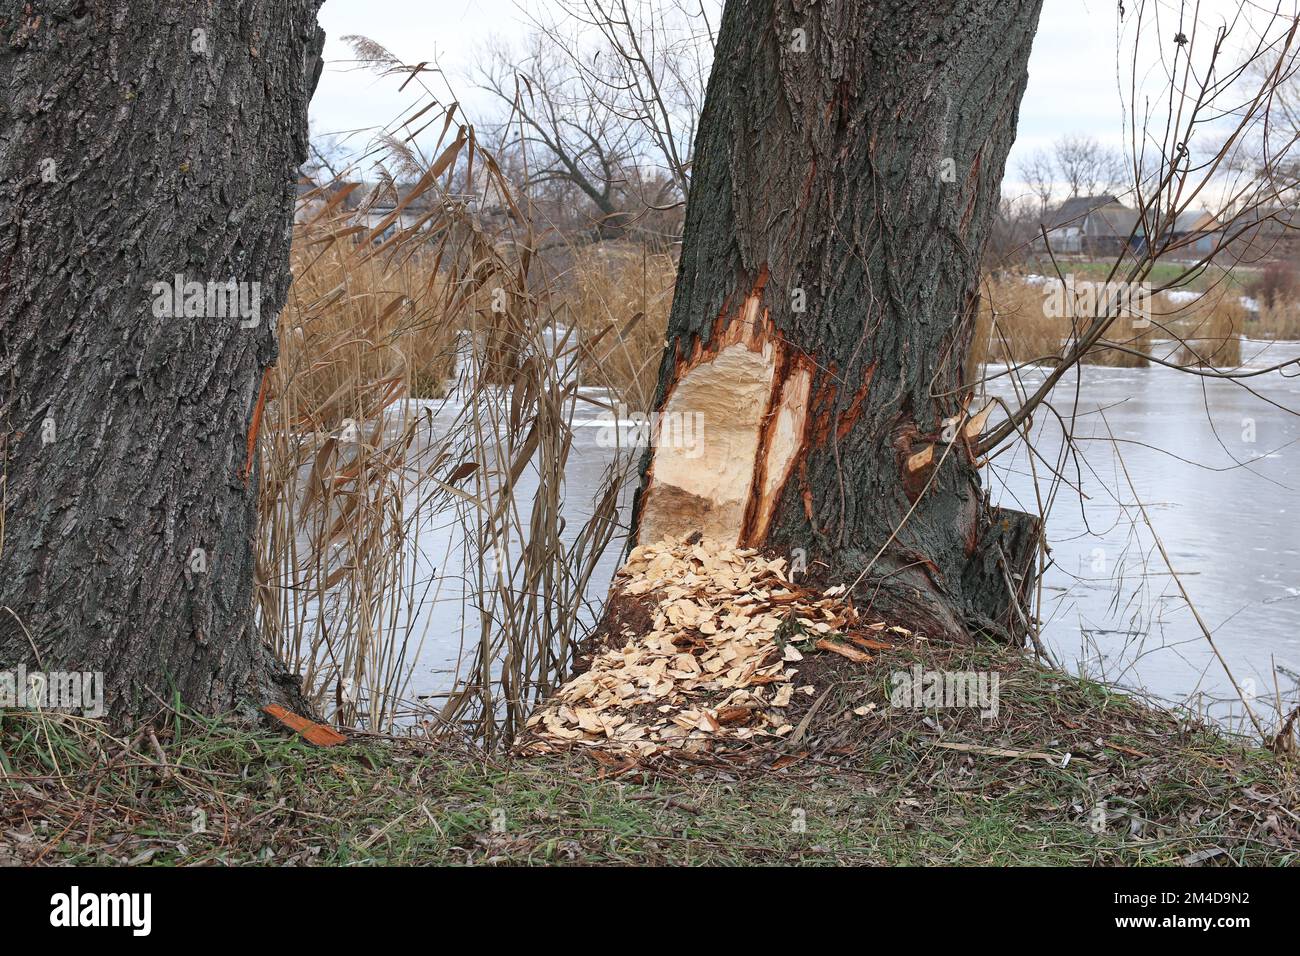 Tree gnawed by beavers. Damaged tree with animals teeth marks near river Stock Photo